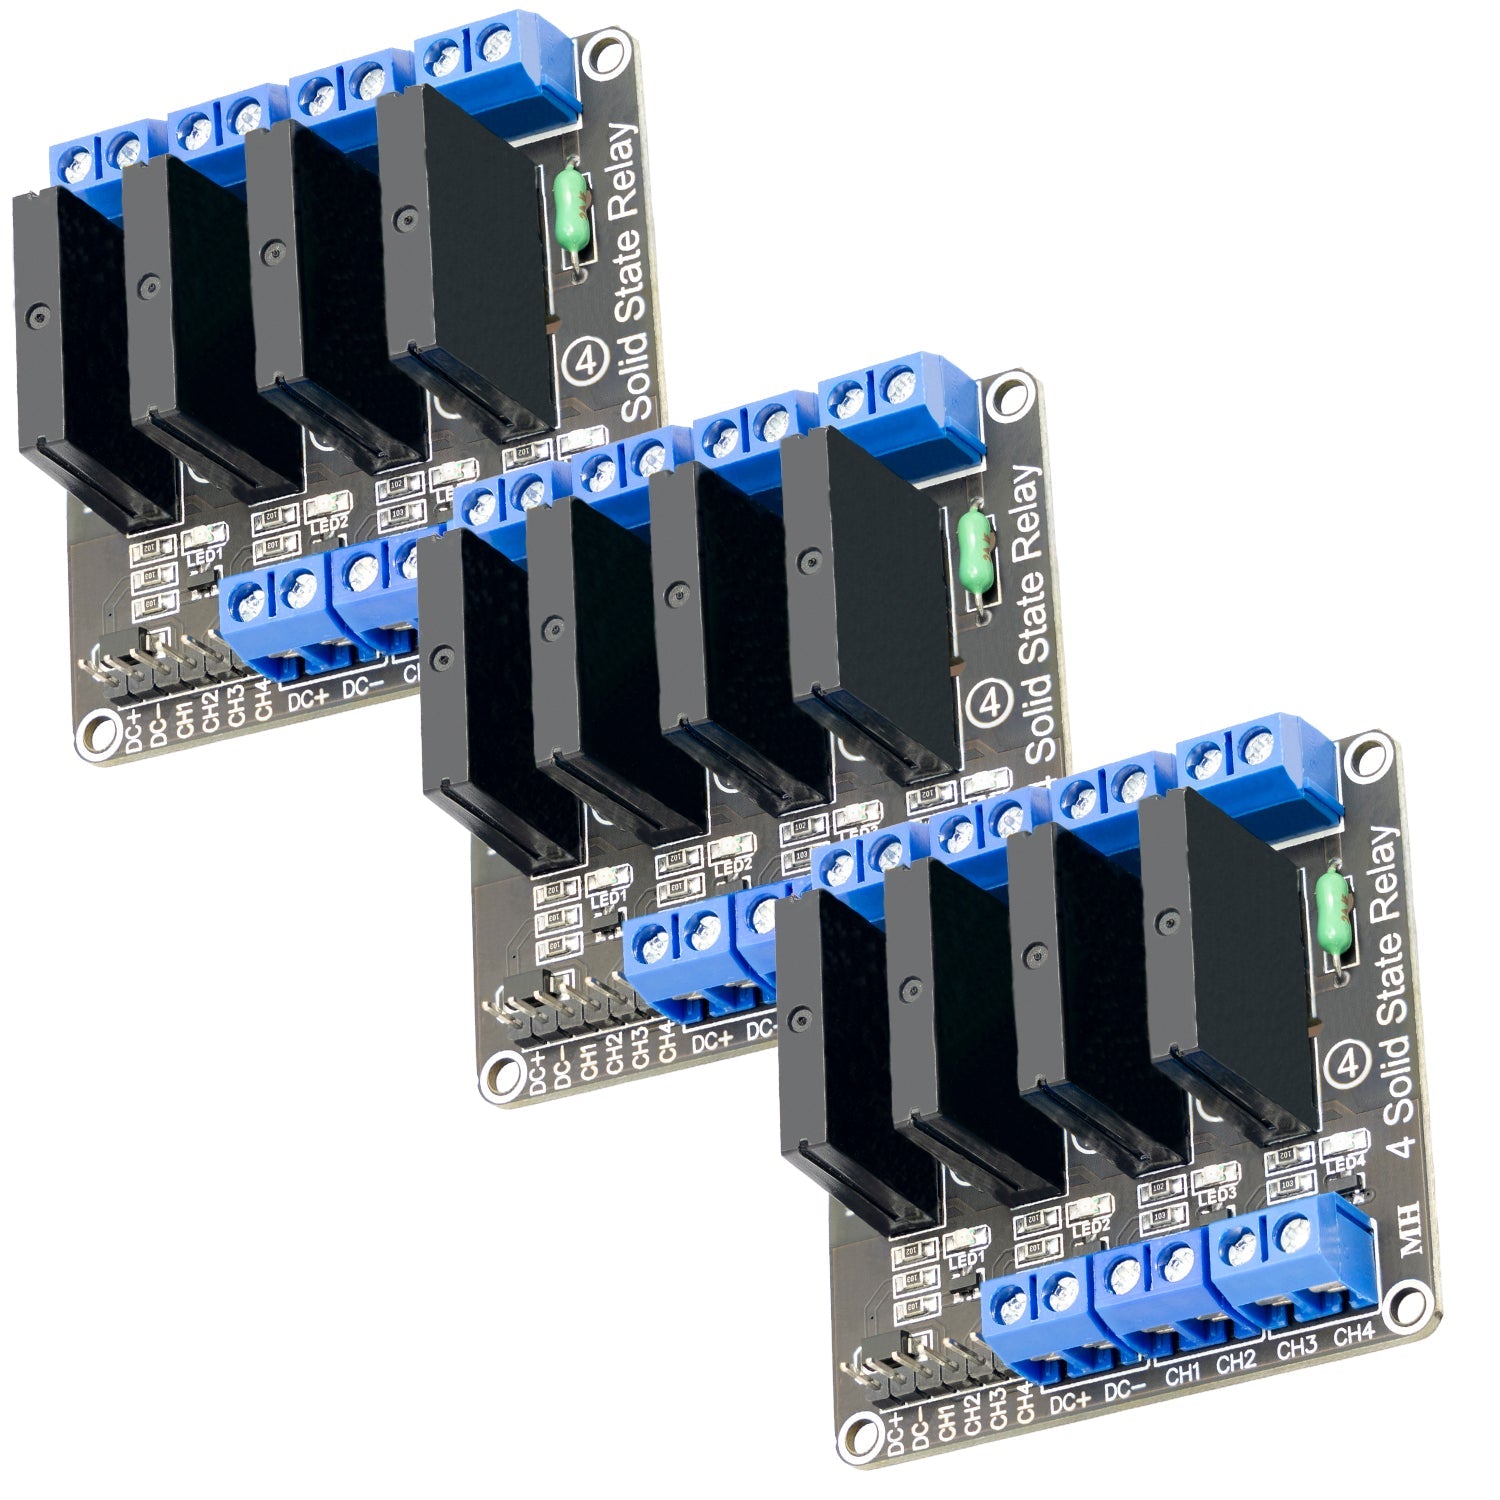 4 Channel Solid State Relay 5V DC Low Level Trigger Power Switch Compatible with Arduino and Raspberry Pi